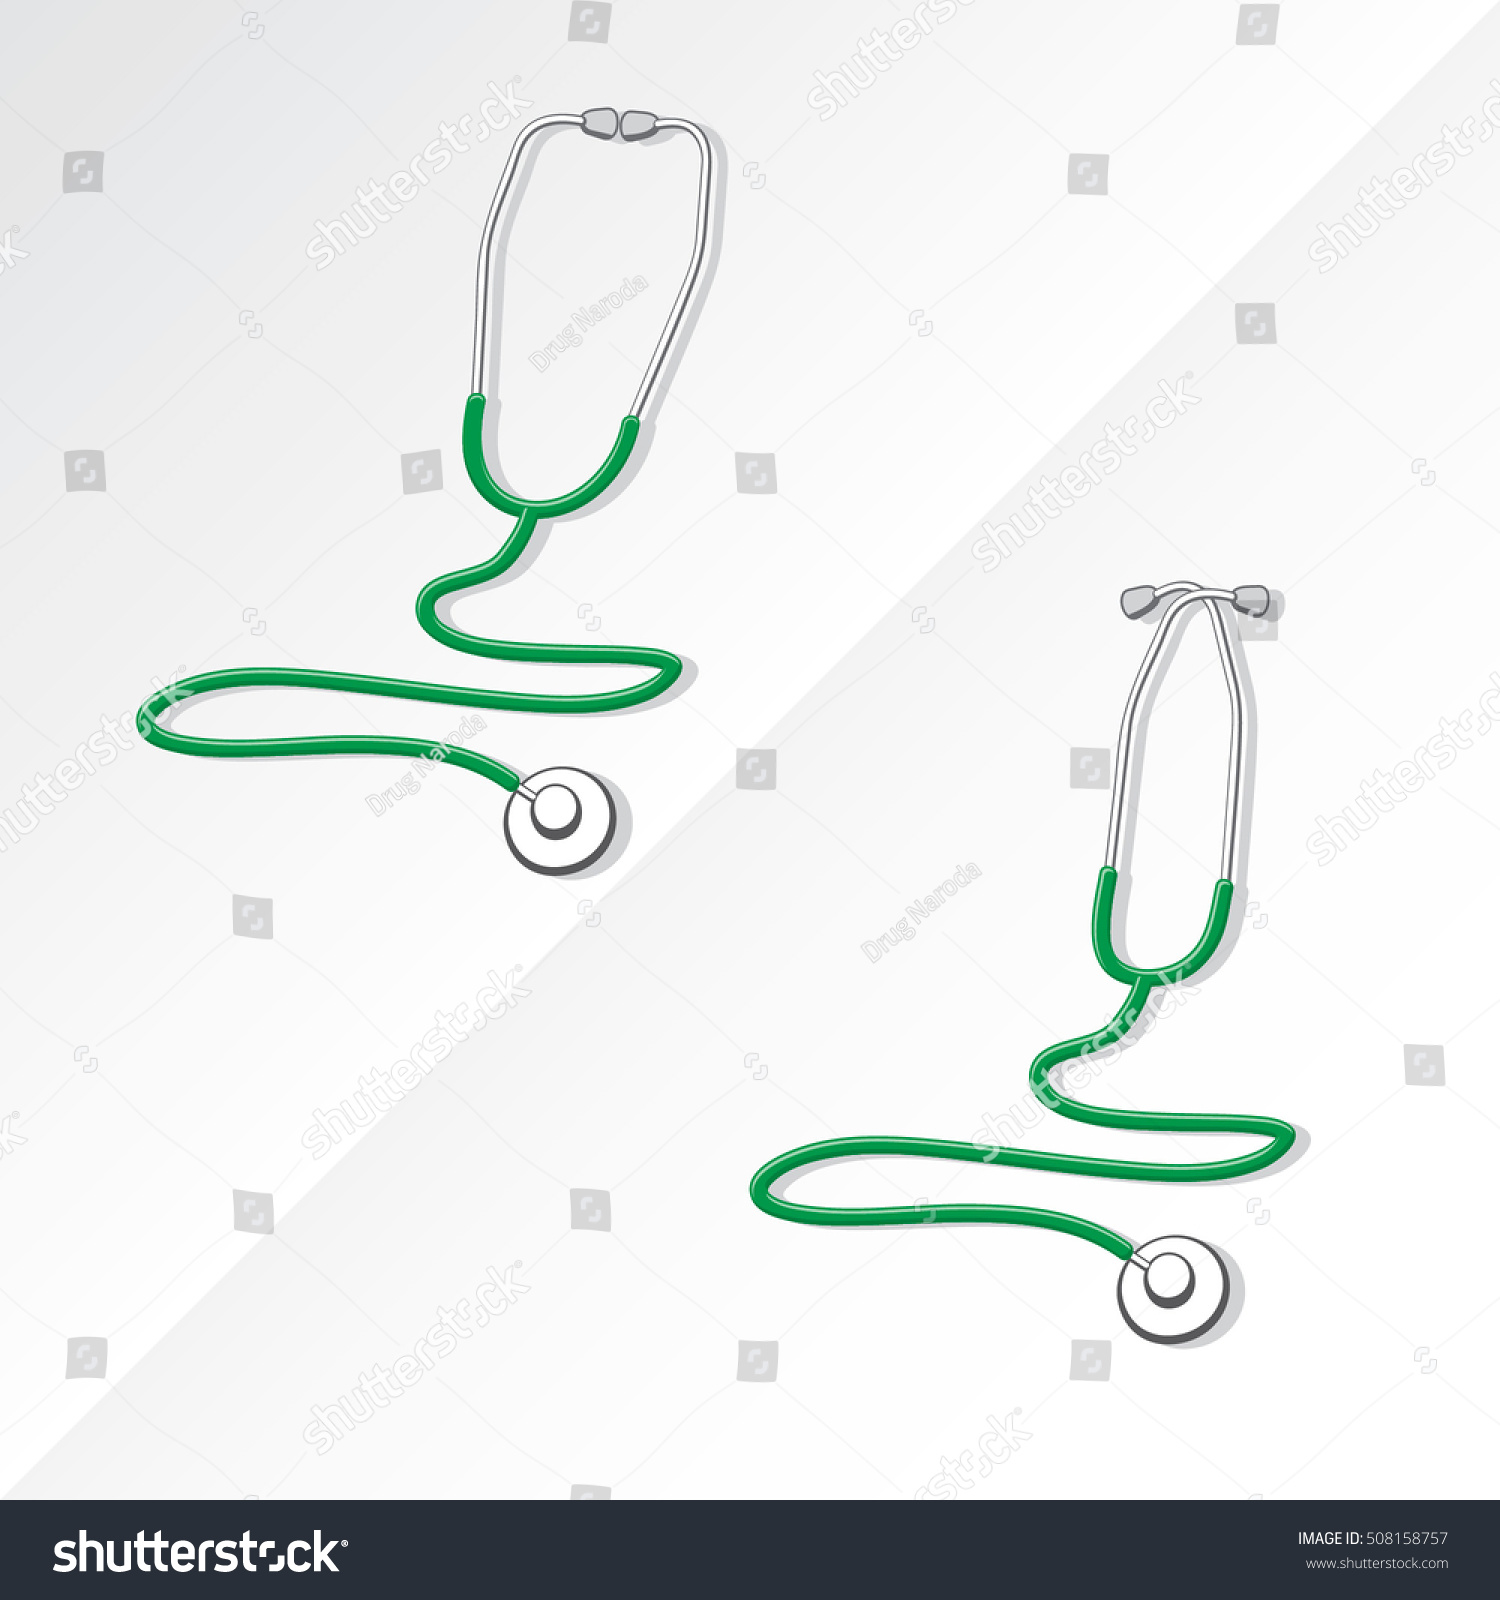 SVG of Two Medical Stethoscopes with Zigzag Shape Tubing Icons Set One with Crossed Binaural Another with Eartips Put Together - Grayscale and Green Objects on White Background - Realistic Flat Design svg